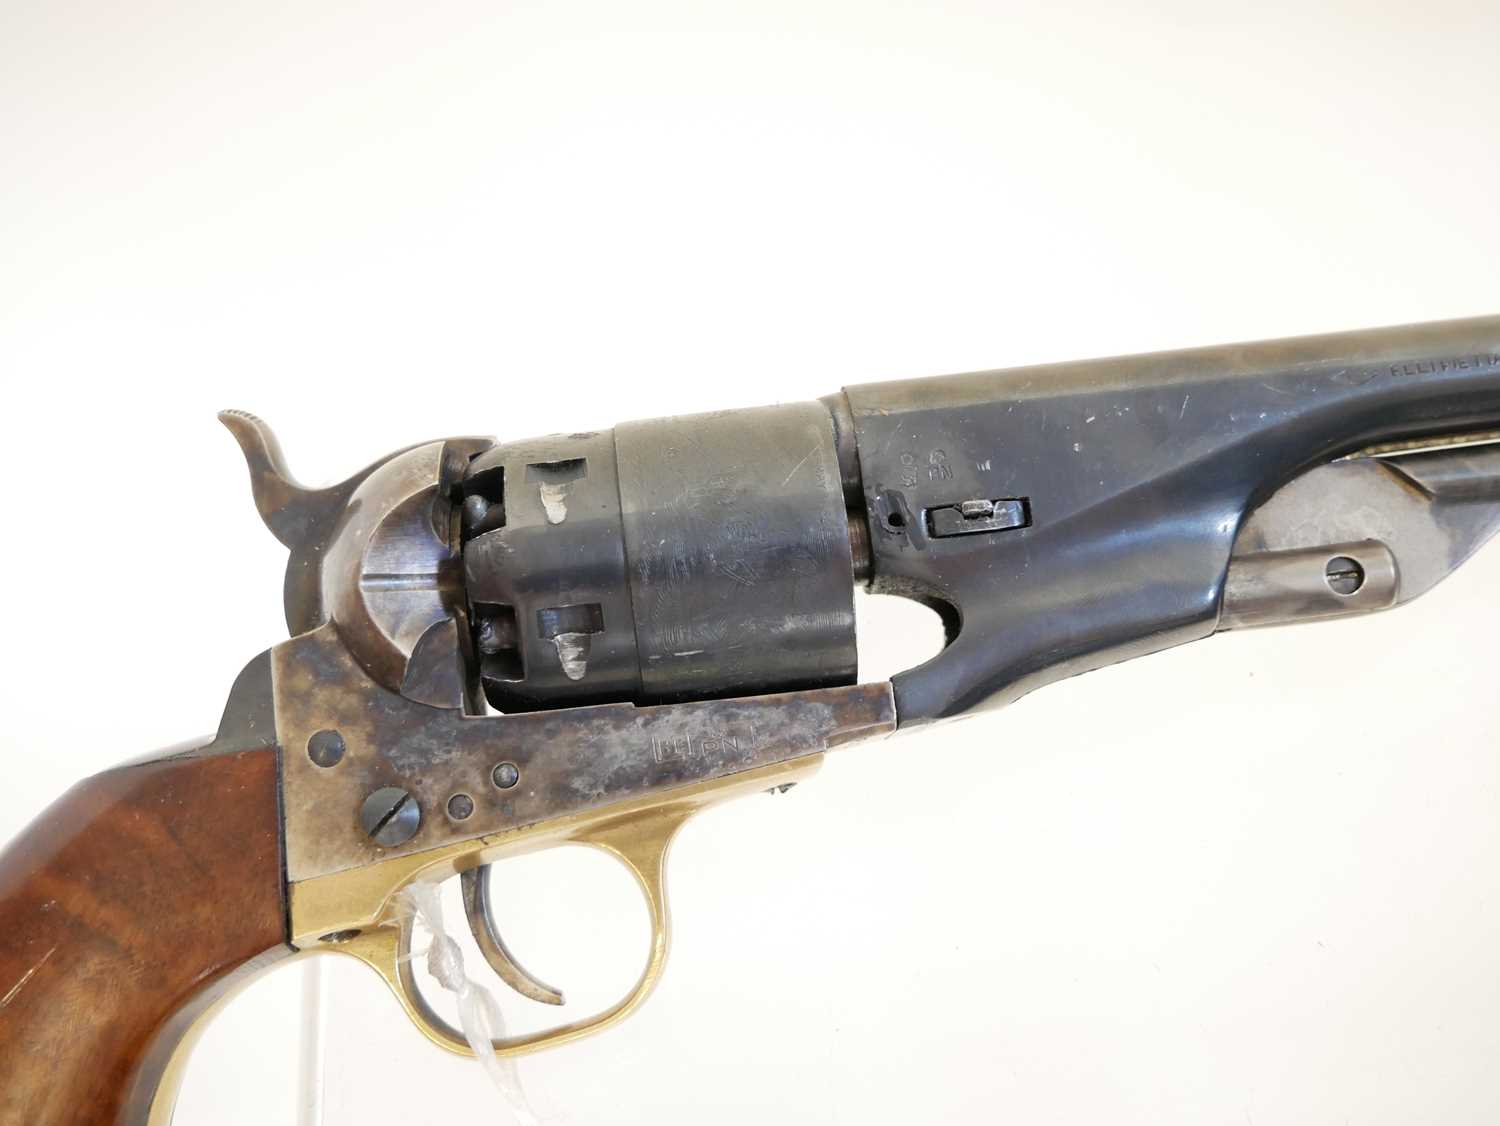 Deactivated Pietta copy of an 1860 pattern Colt army percussion .44 revolver, 8inch barrel, serial - Image 3 of 8